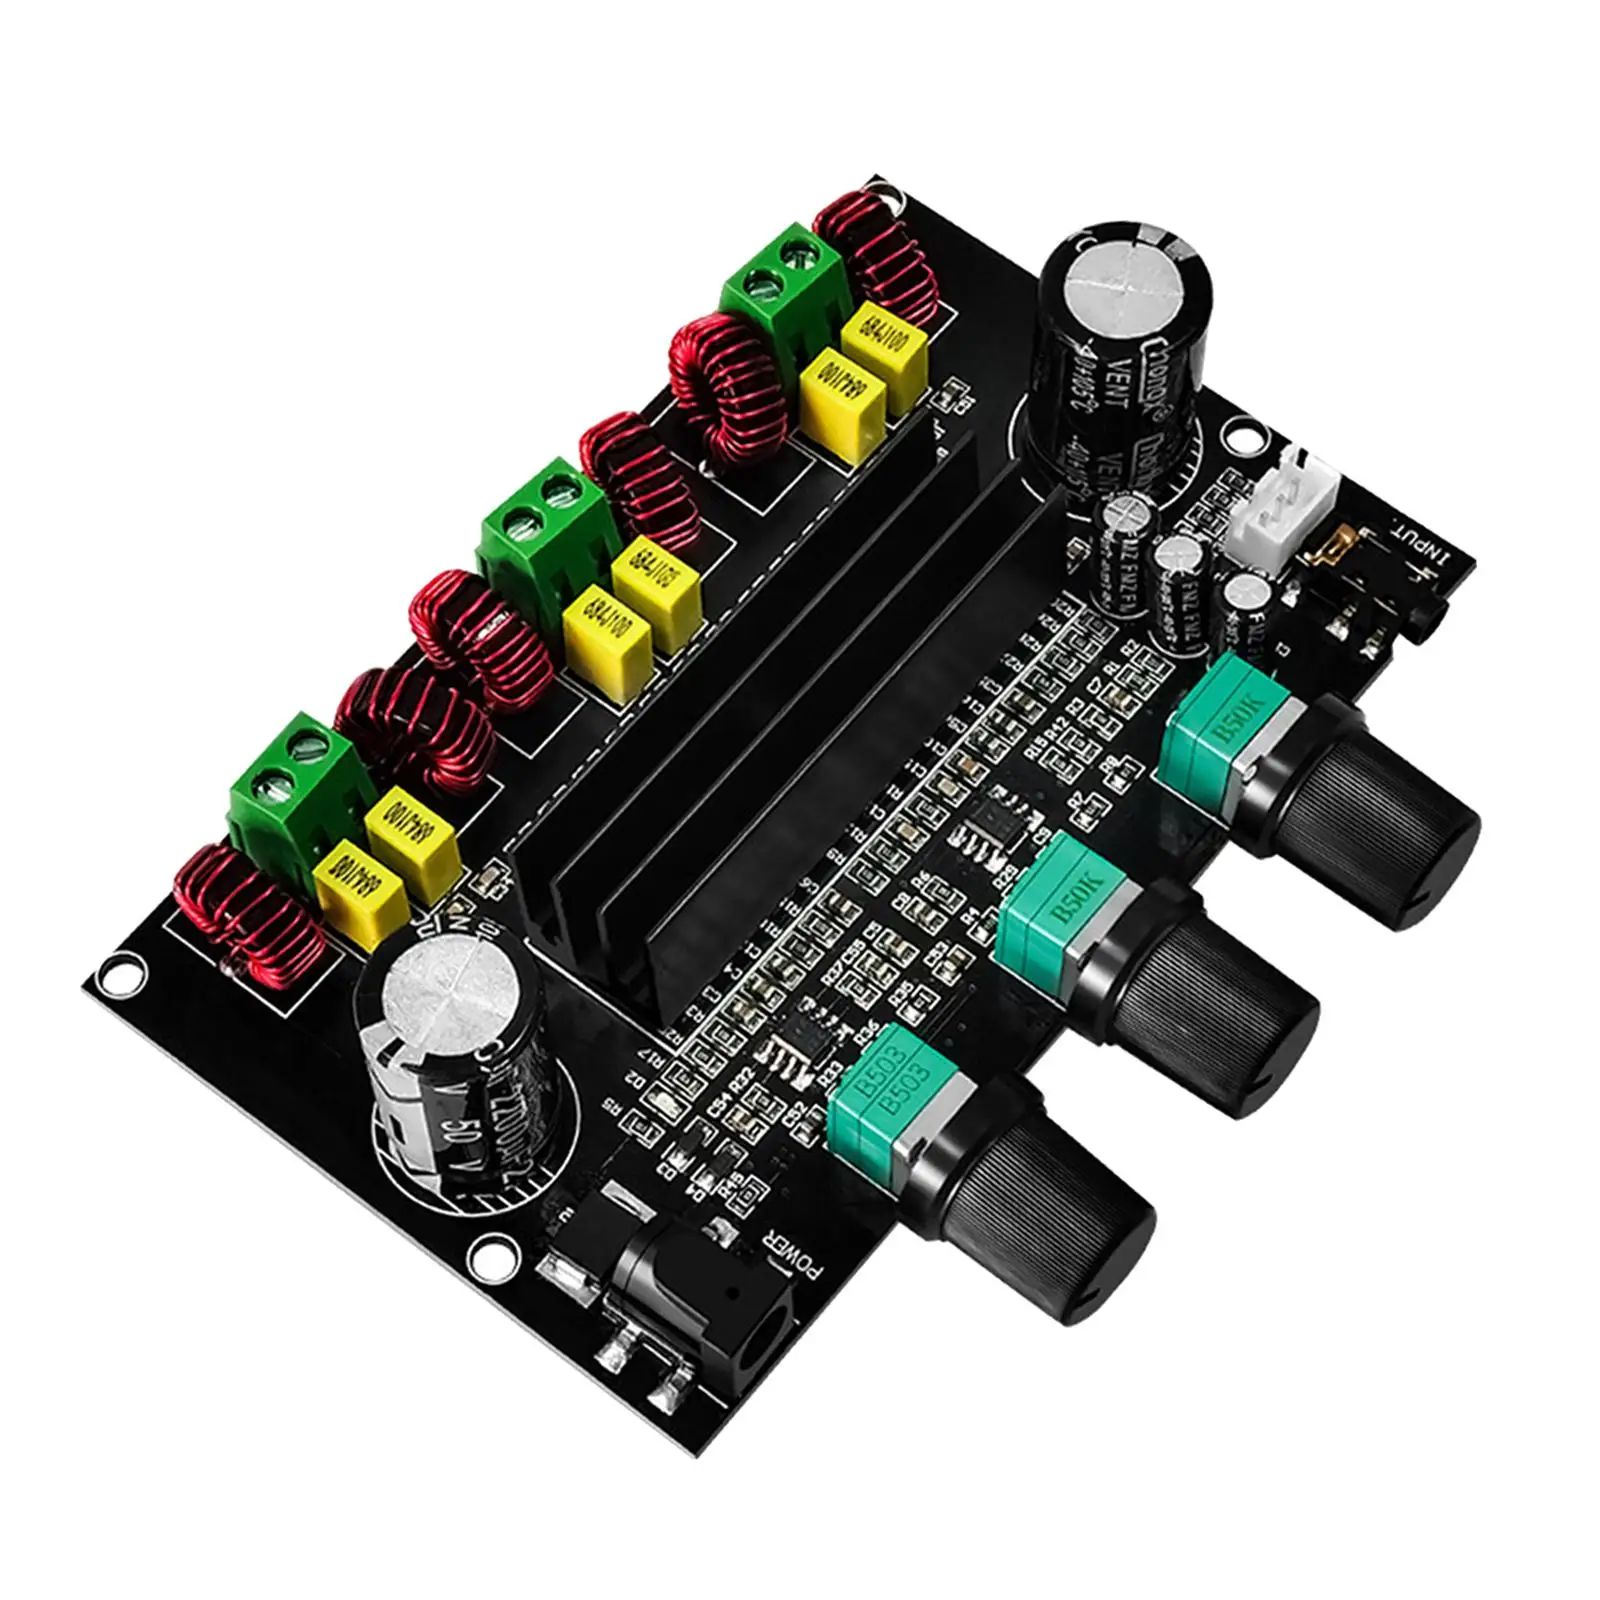 80Wx2+100W Digital Power Audio Amplifier Board TPA3116D2*2 Audio Stereo 12-26V Amp Module for Car Speakers Home Audio